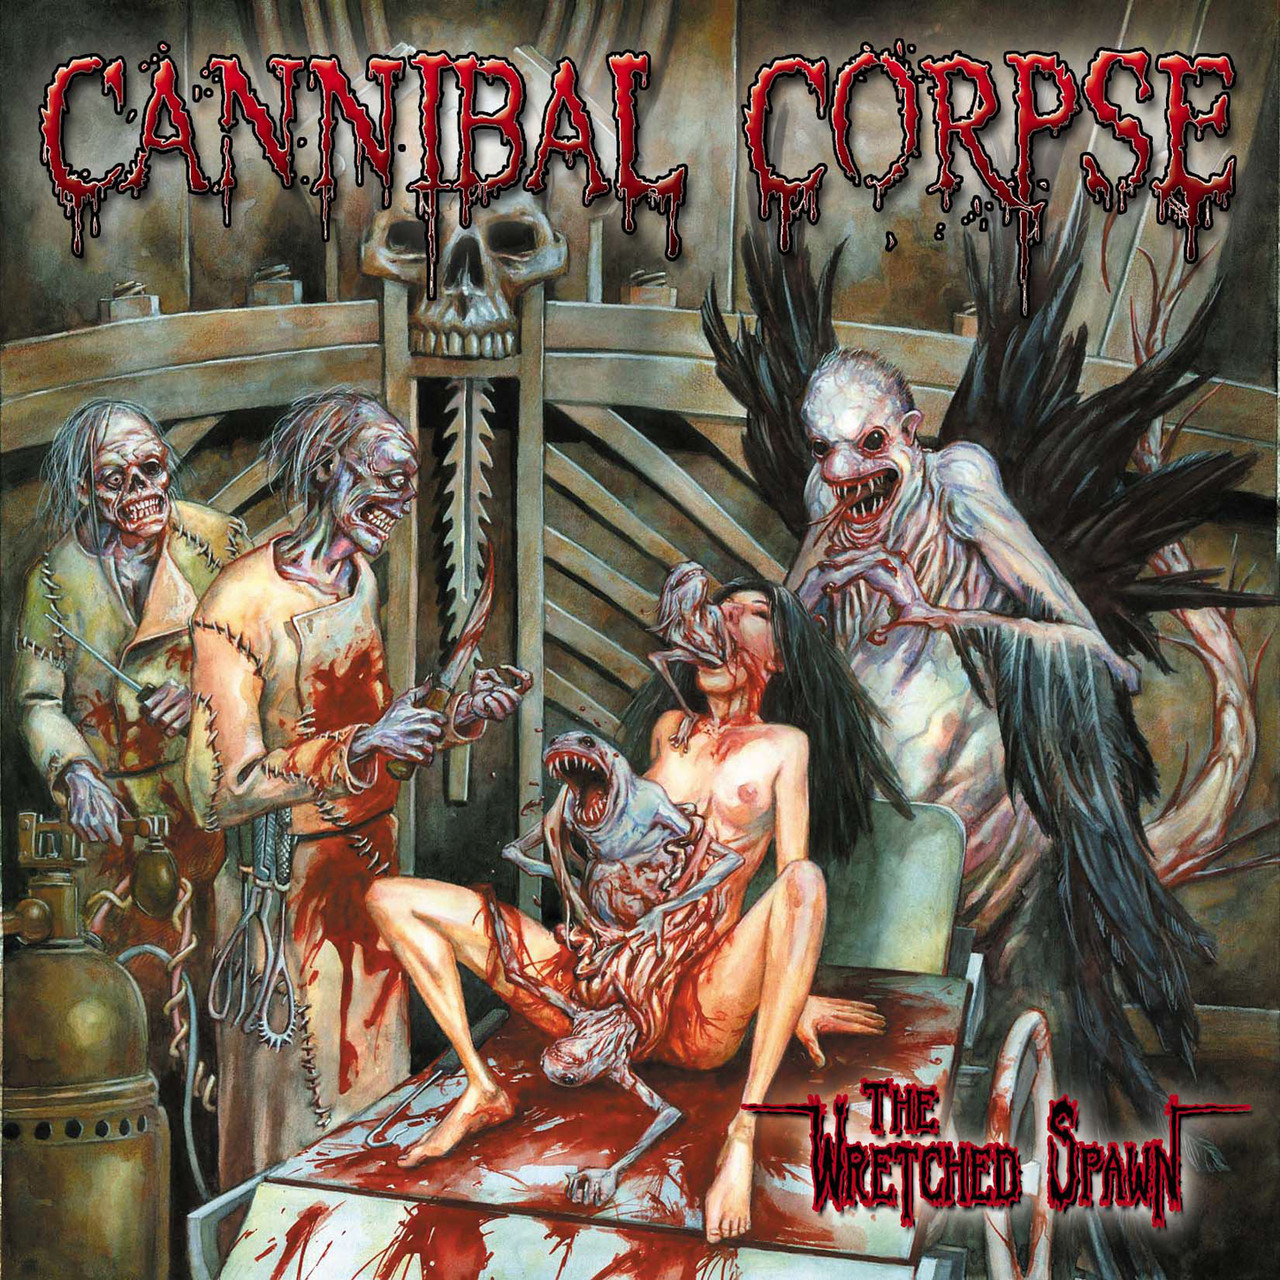 Cannibal Corpse 'The Wretched Spawn' CD